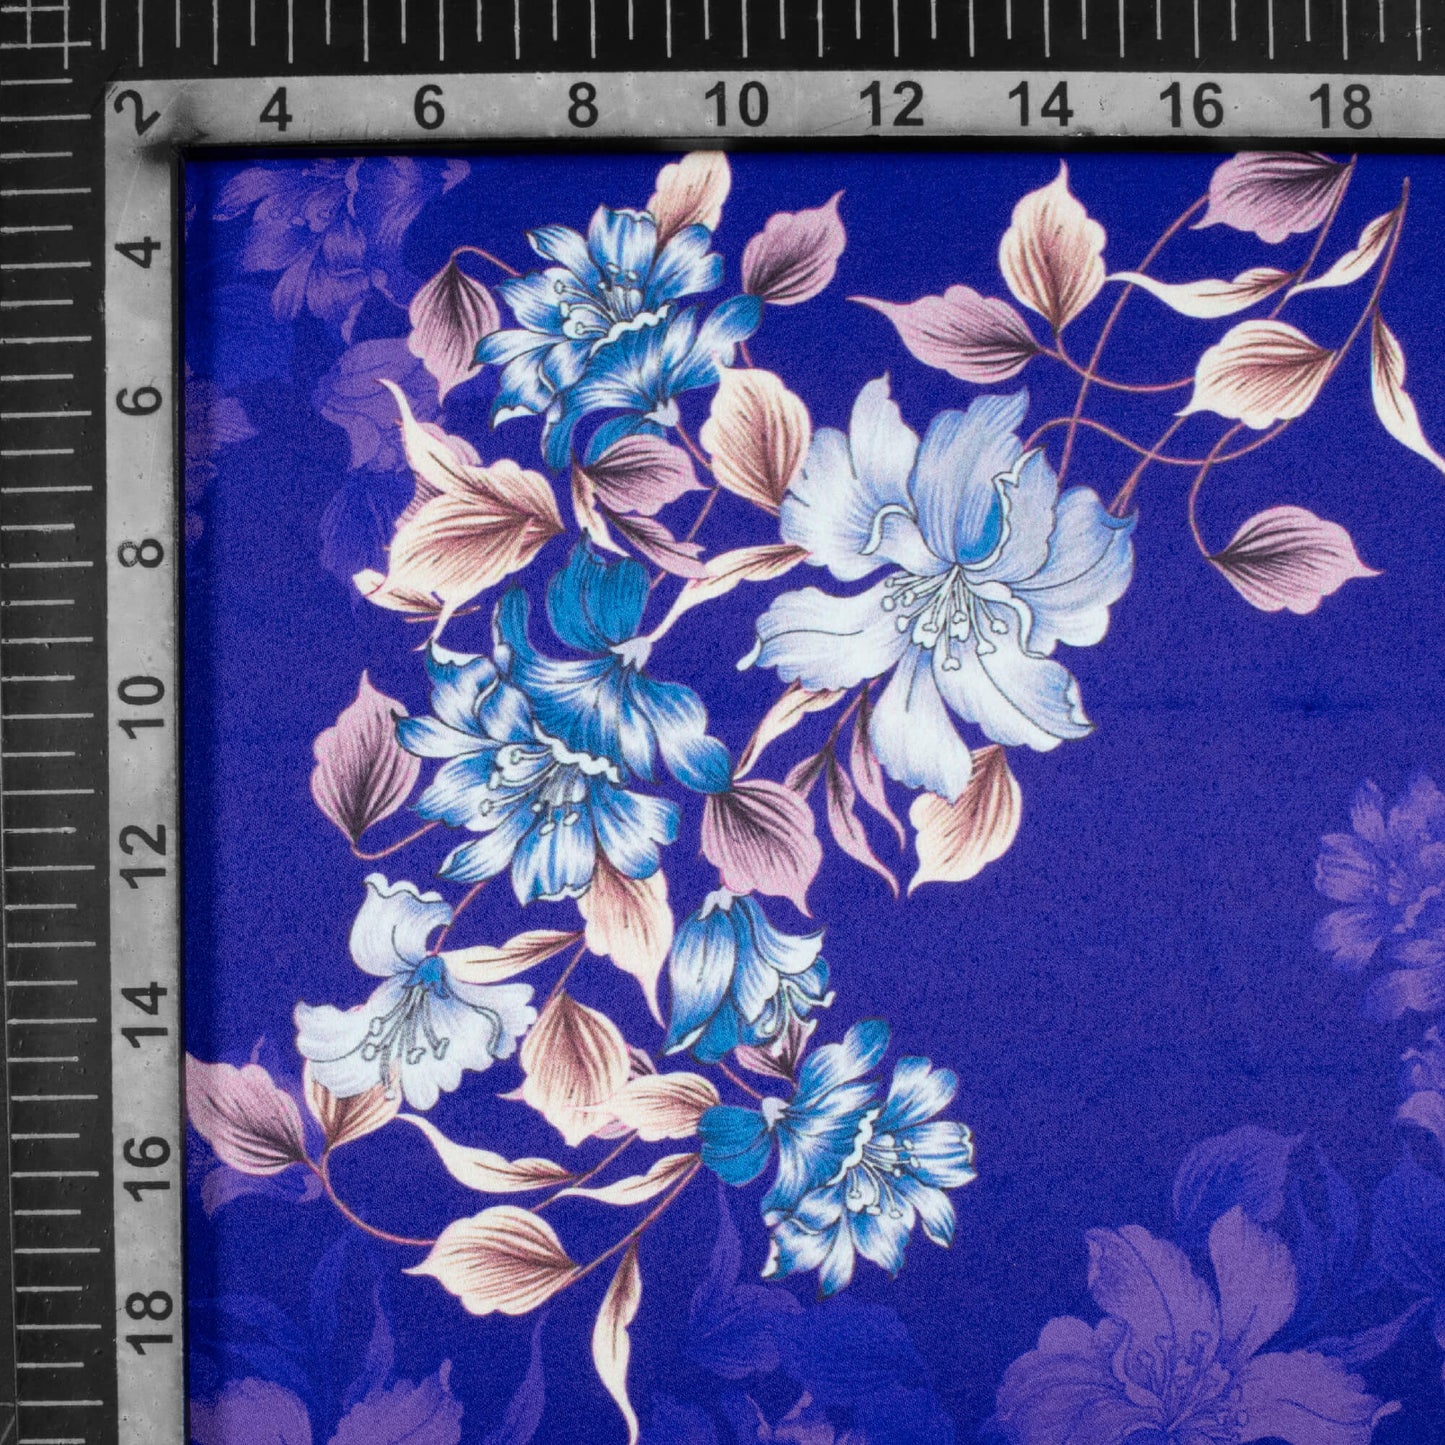 Royal Blue And Beige Floral Pattern Digital Print Charmeuse Satin Fabric (Width 58 Inches)